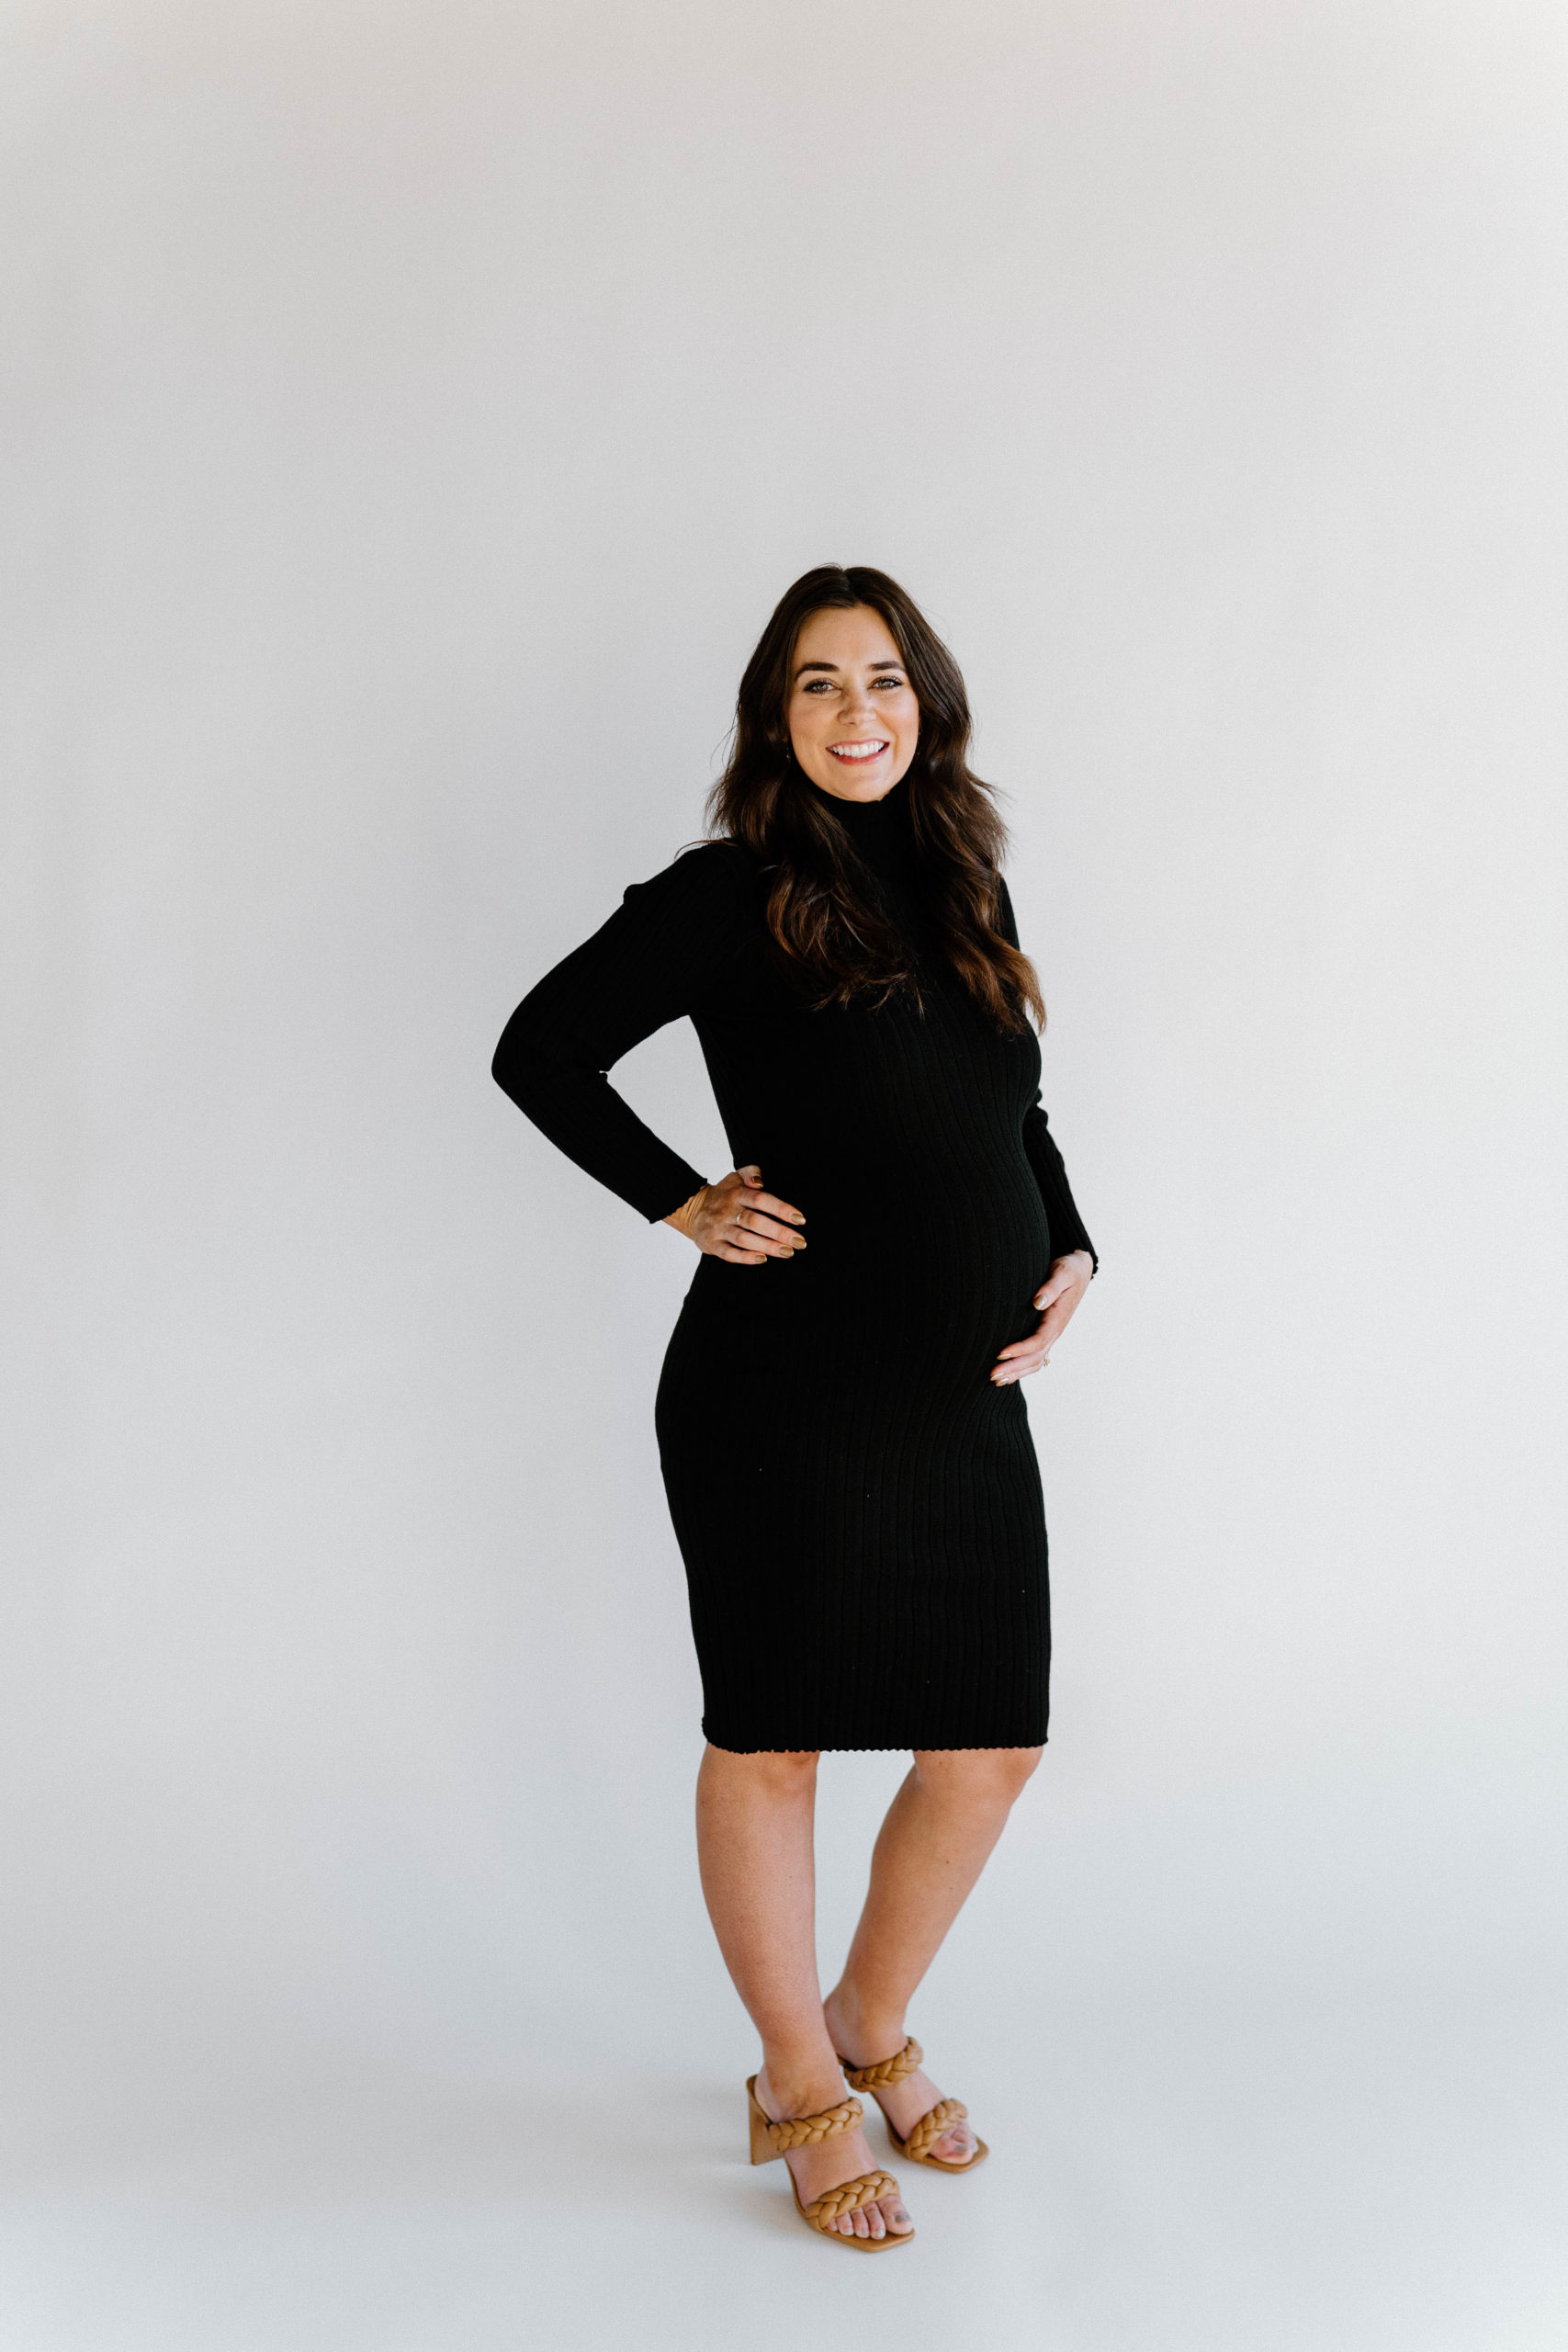 Maternity session of mom in black dress